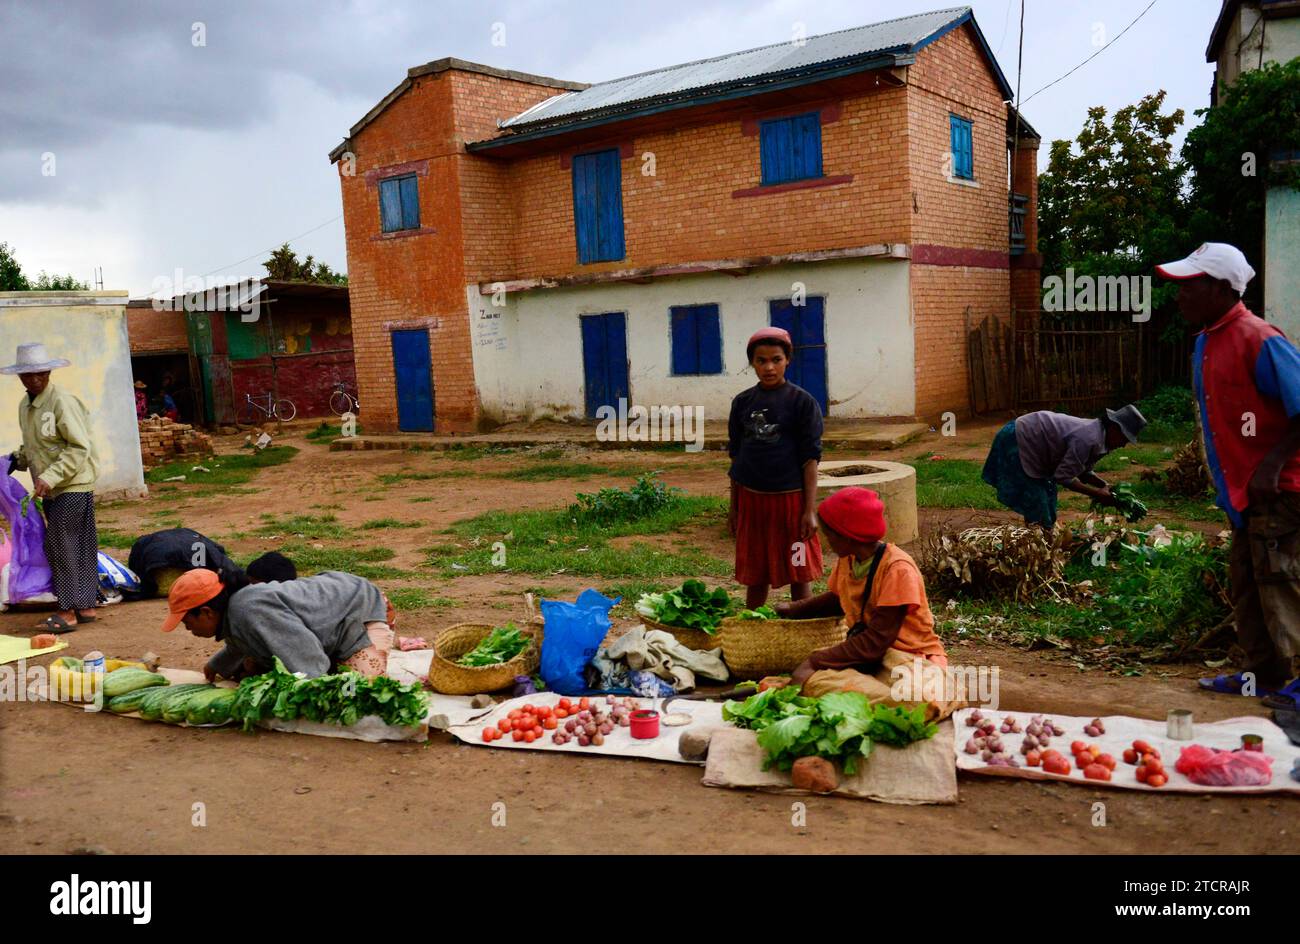 A roadside market in central Madagascar. Stock Photo